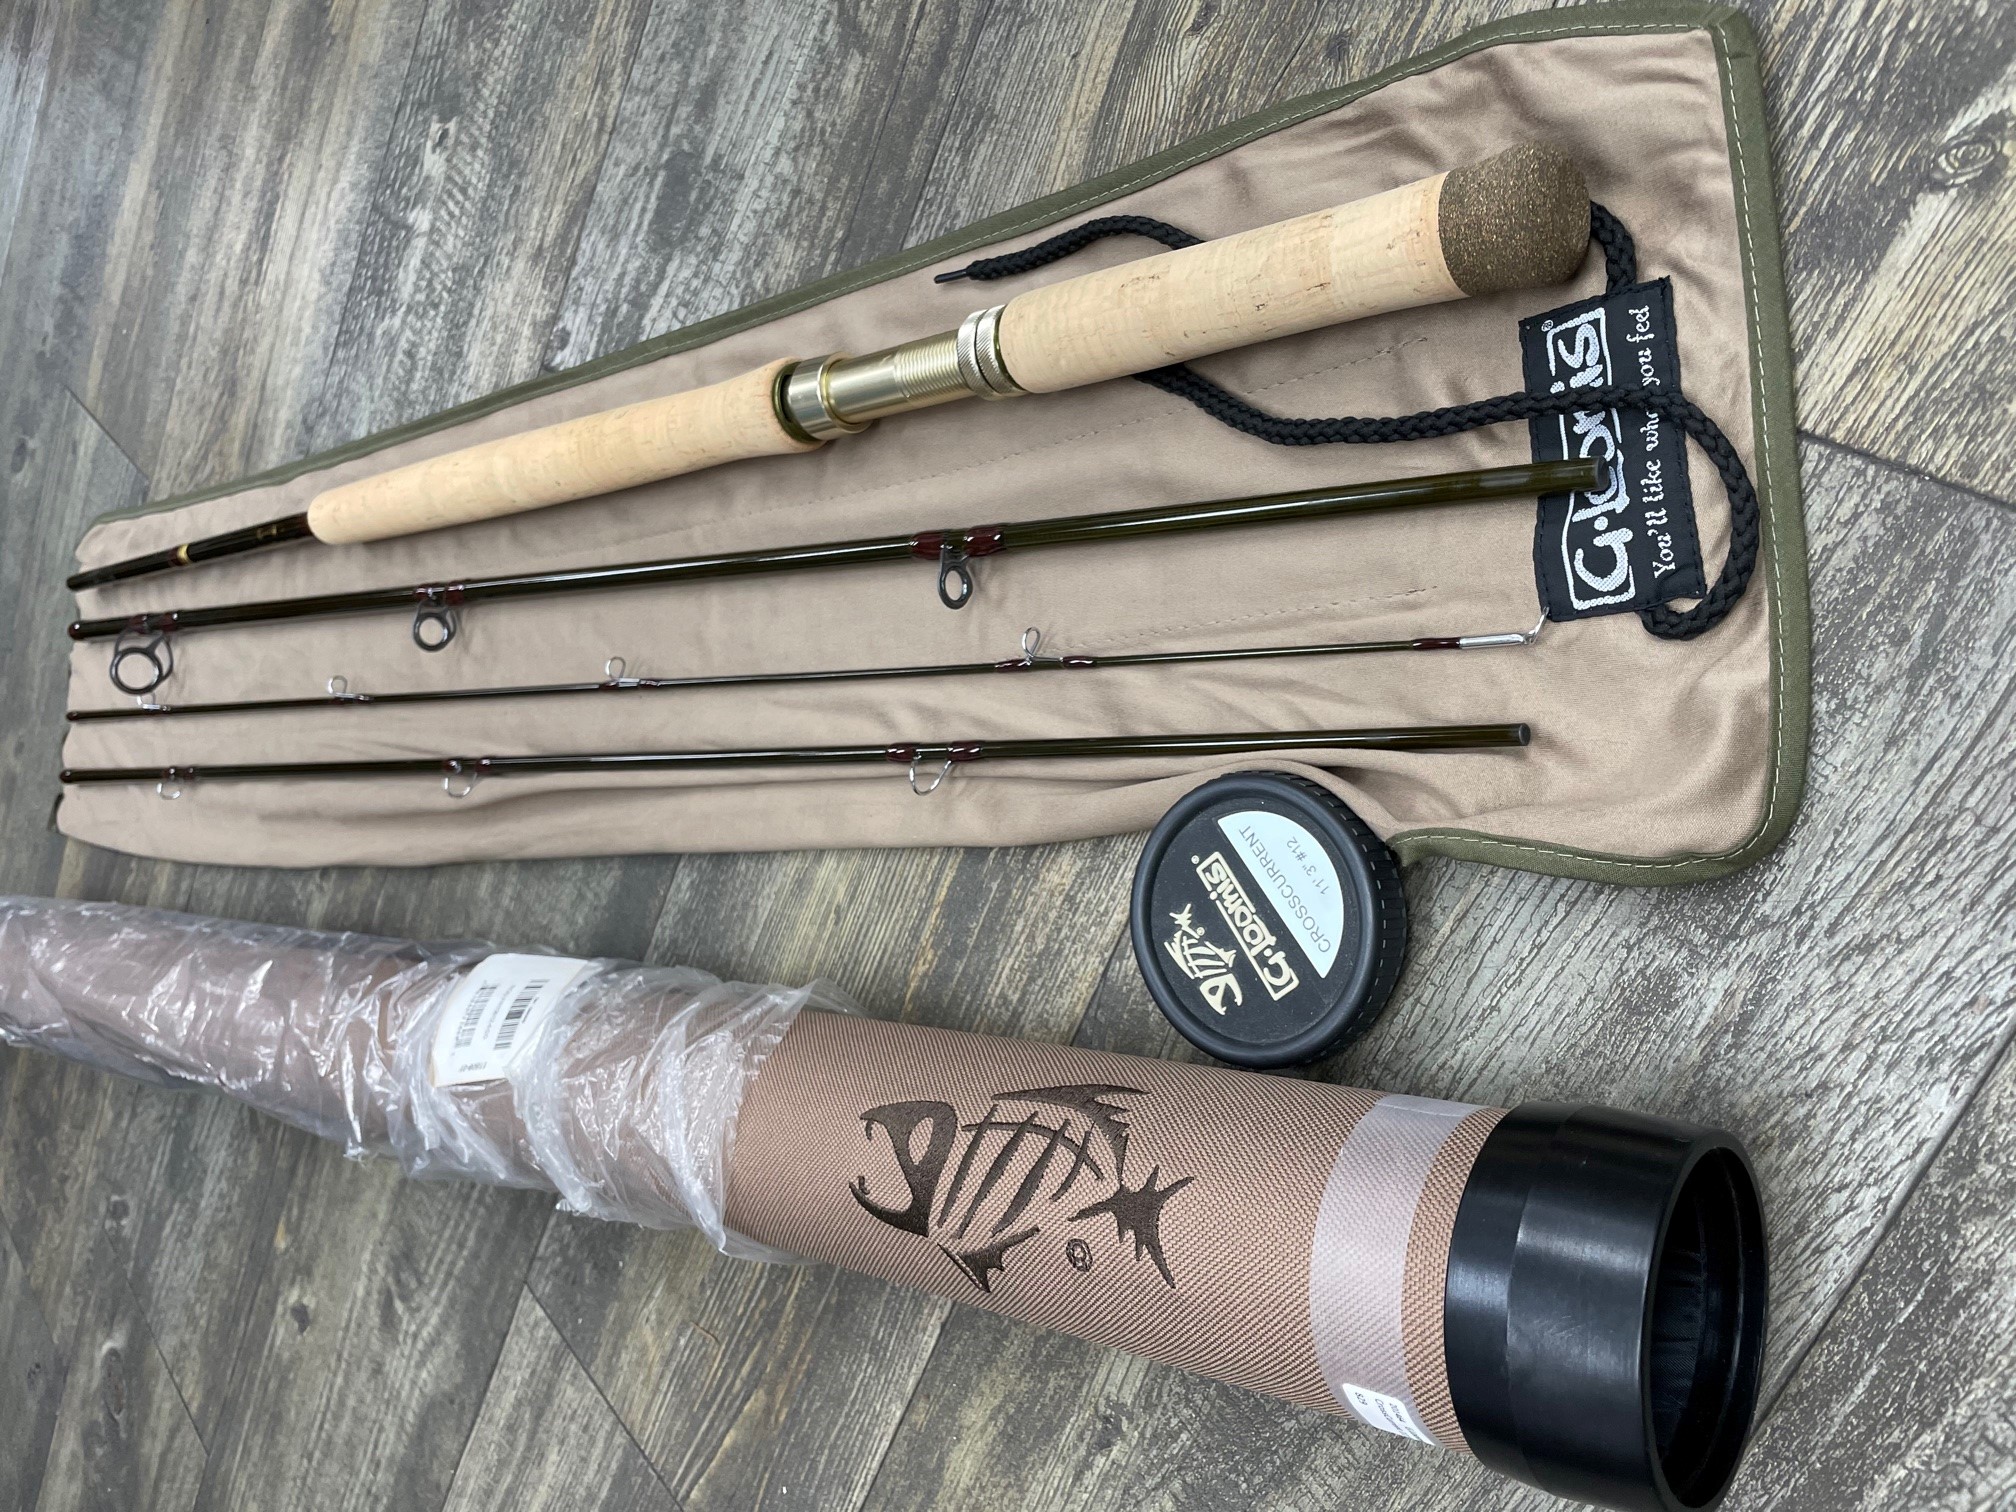 G. Loomis CrossCurrent Offering fly rods for salt water, fre